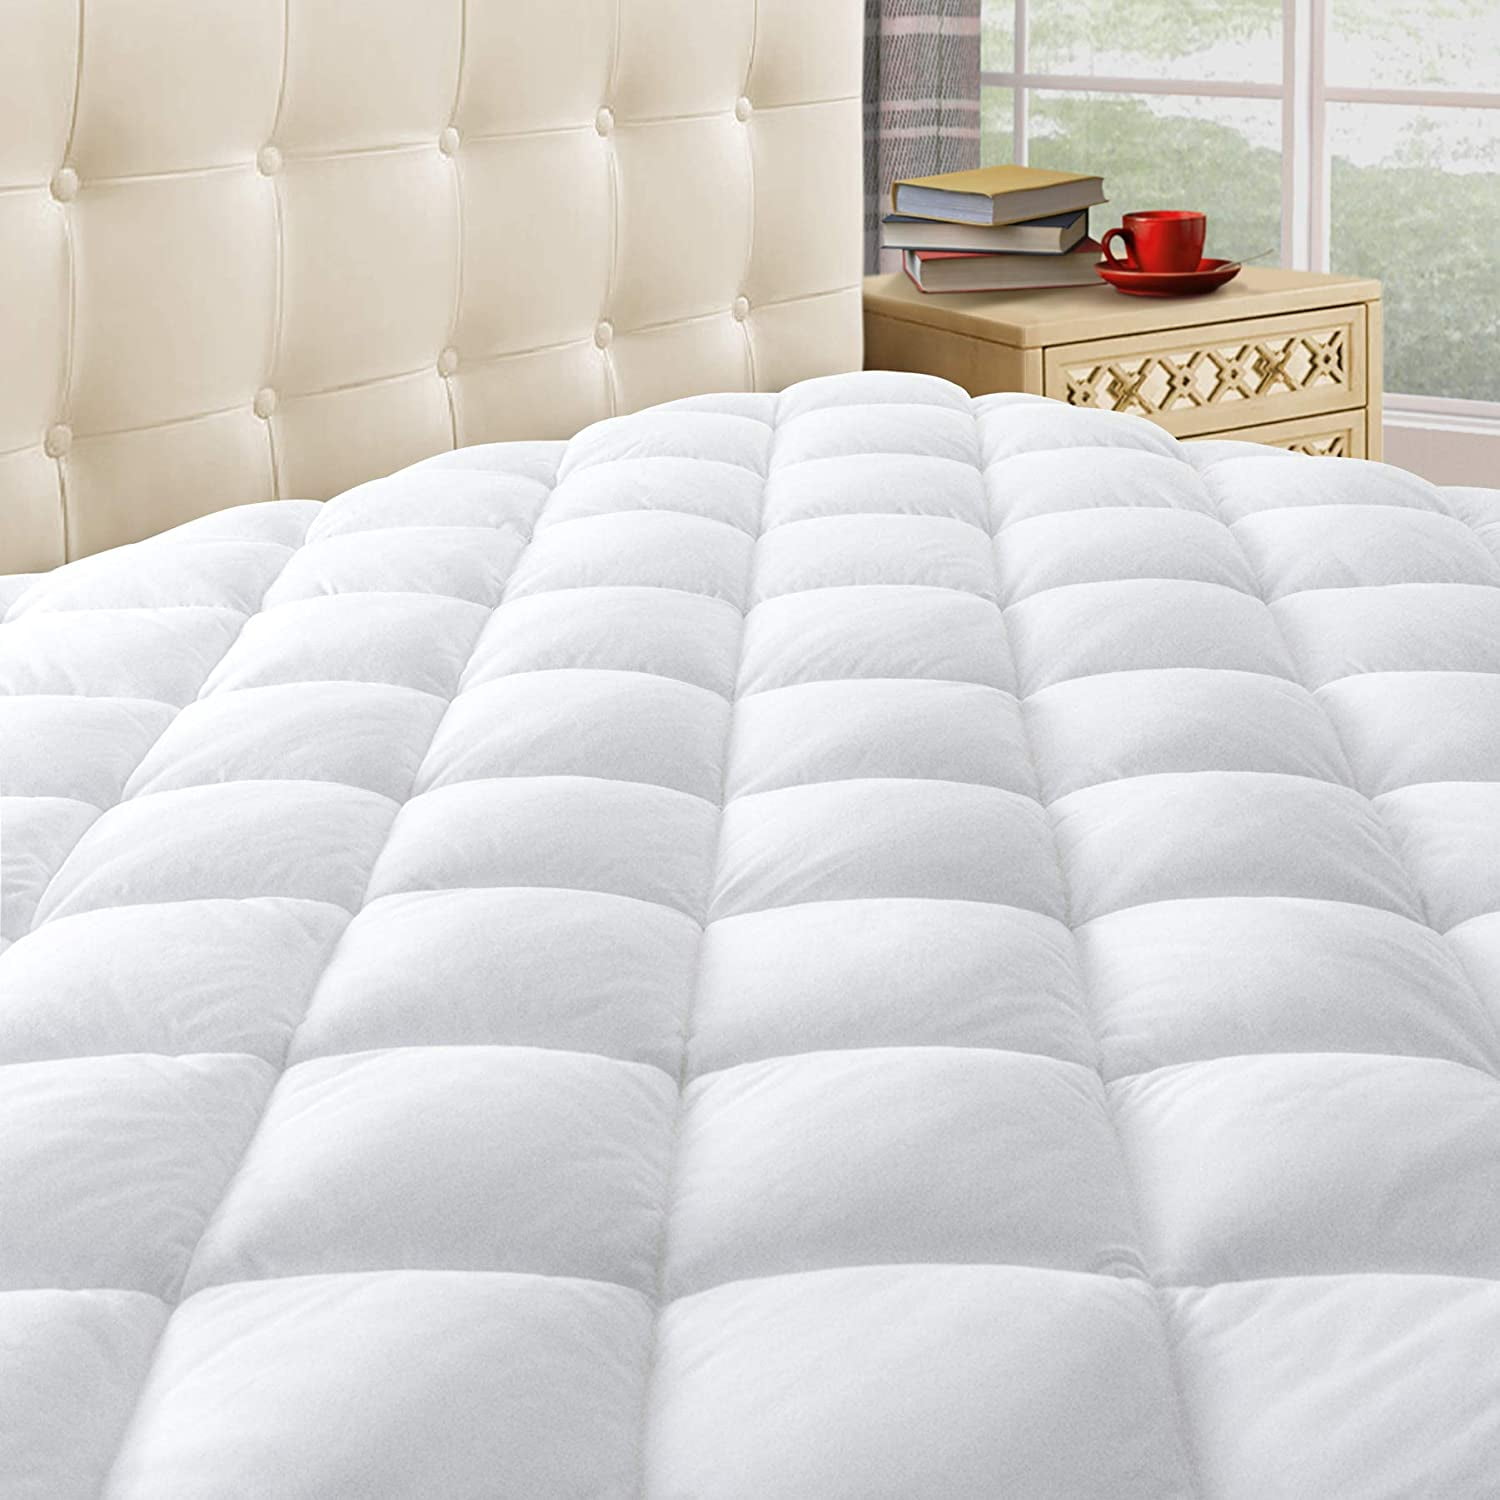 Soft Fluffy Pillow Top Bed Topper Deep Pocket 8-21 inch Twin XL SLEEP ZONE Quilted Mattress Pad Cover